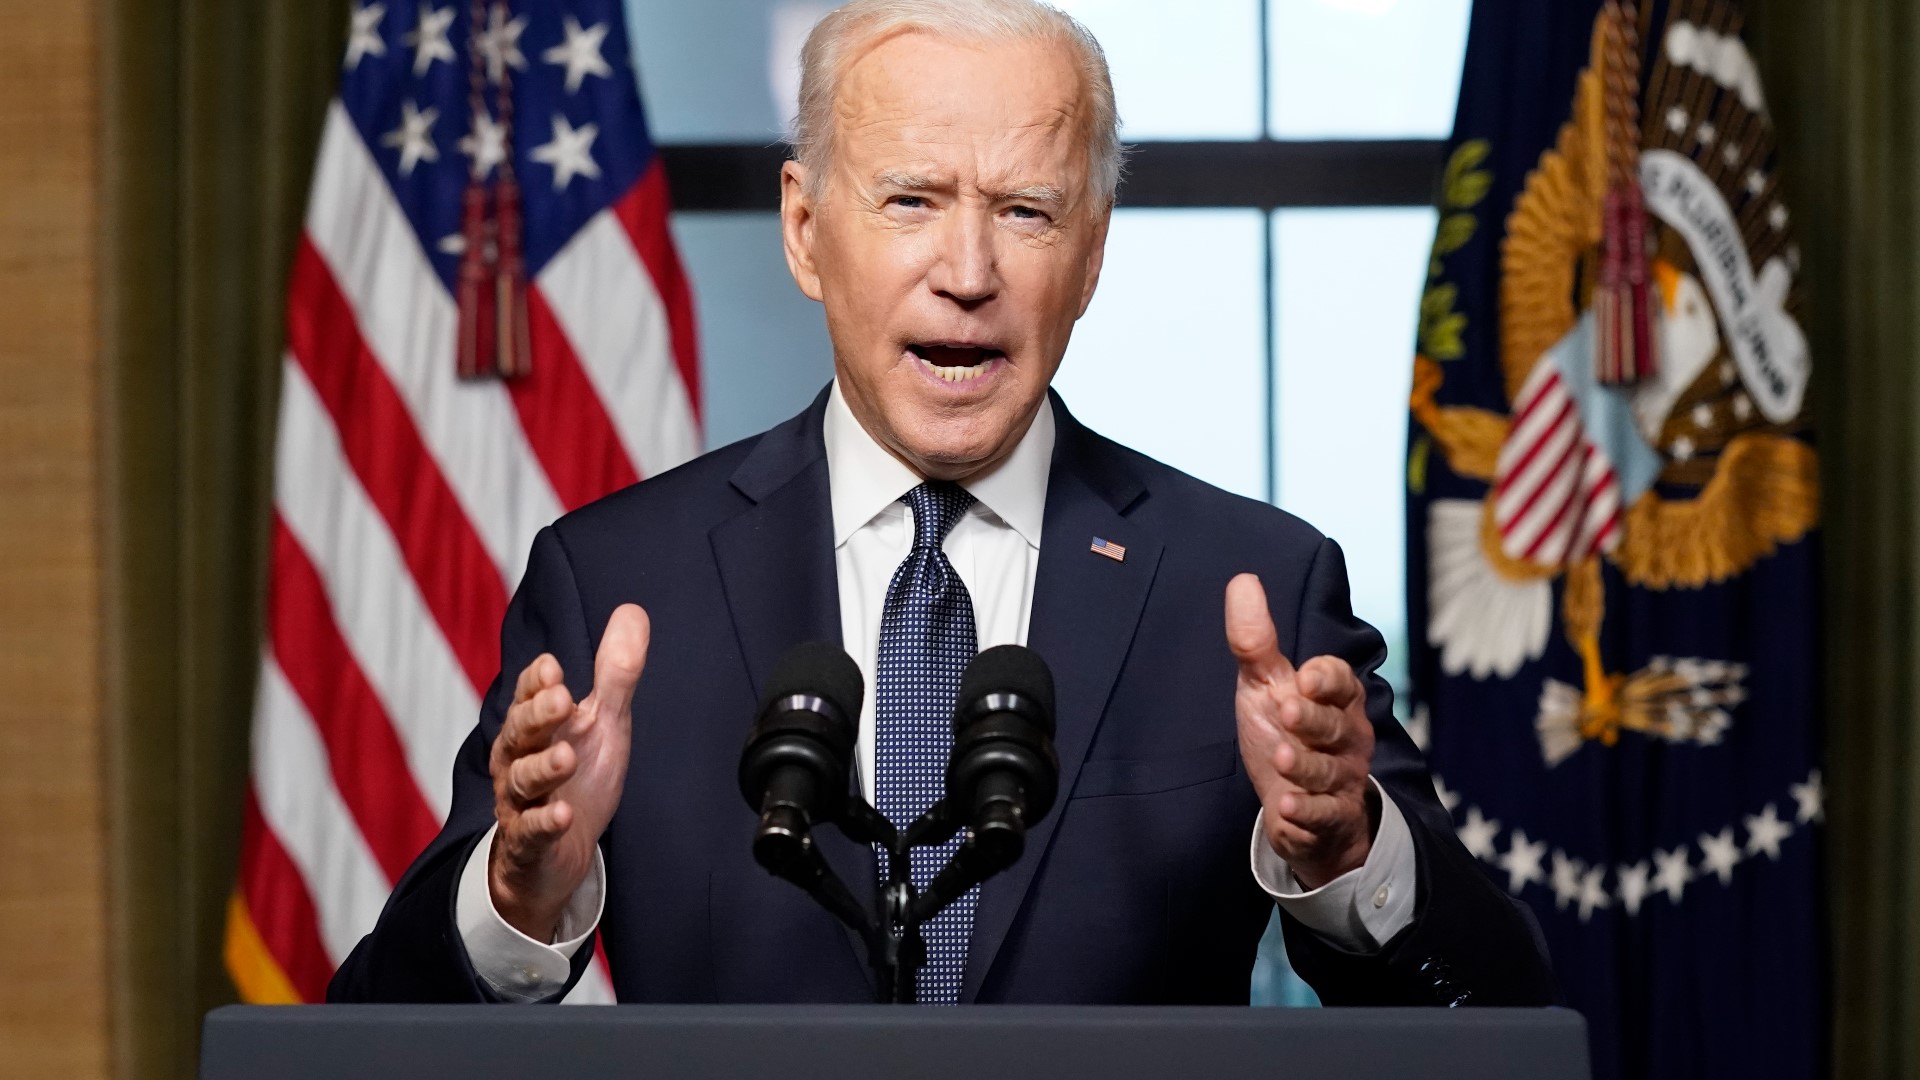 The 2024 campaign was widely expected, as President Biden has been teasing a re-election bid for months.